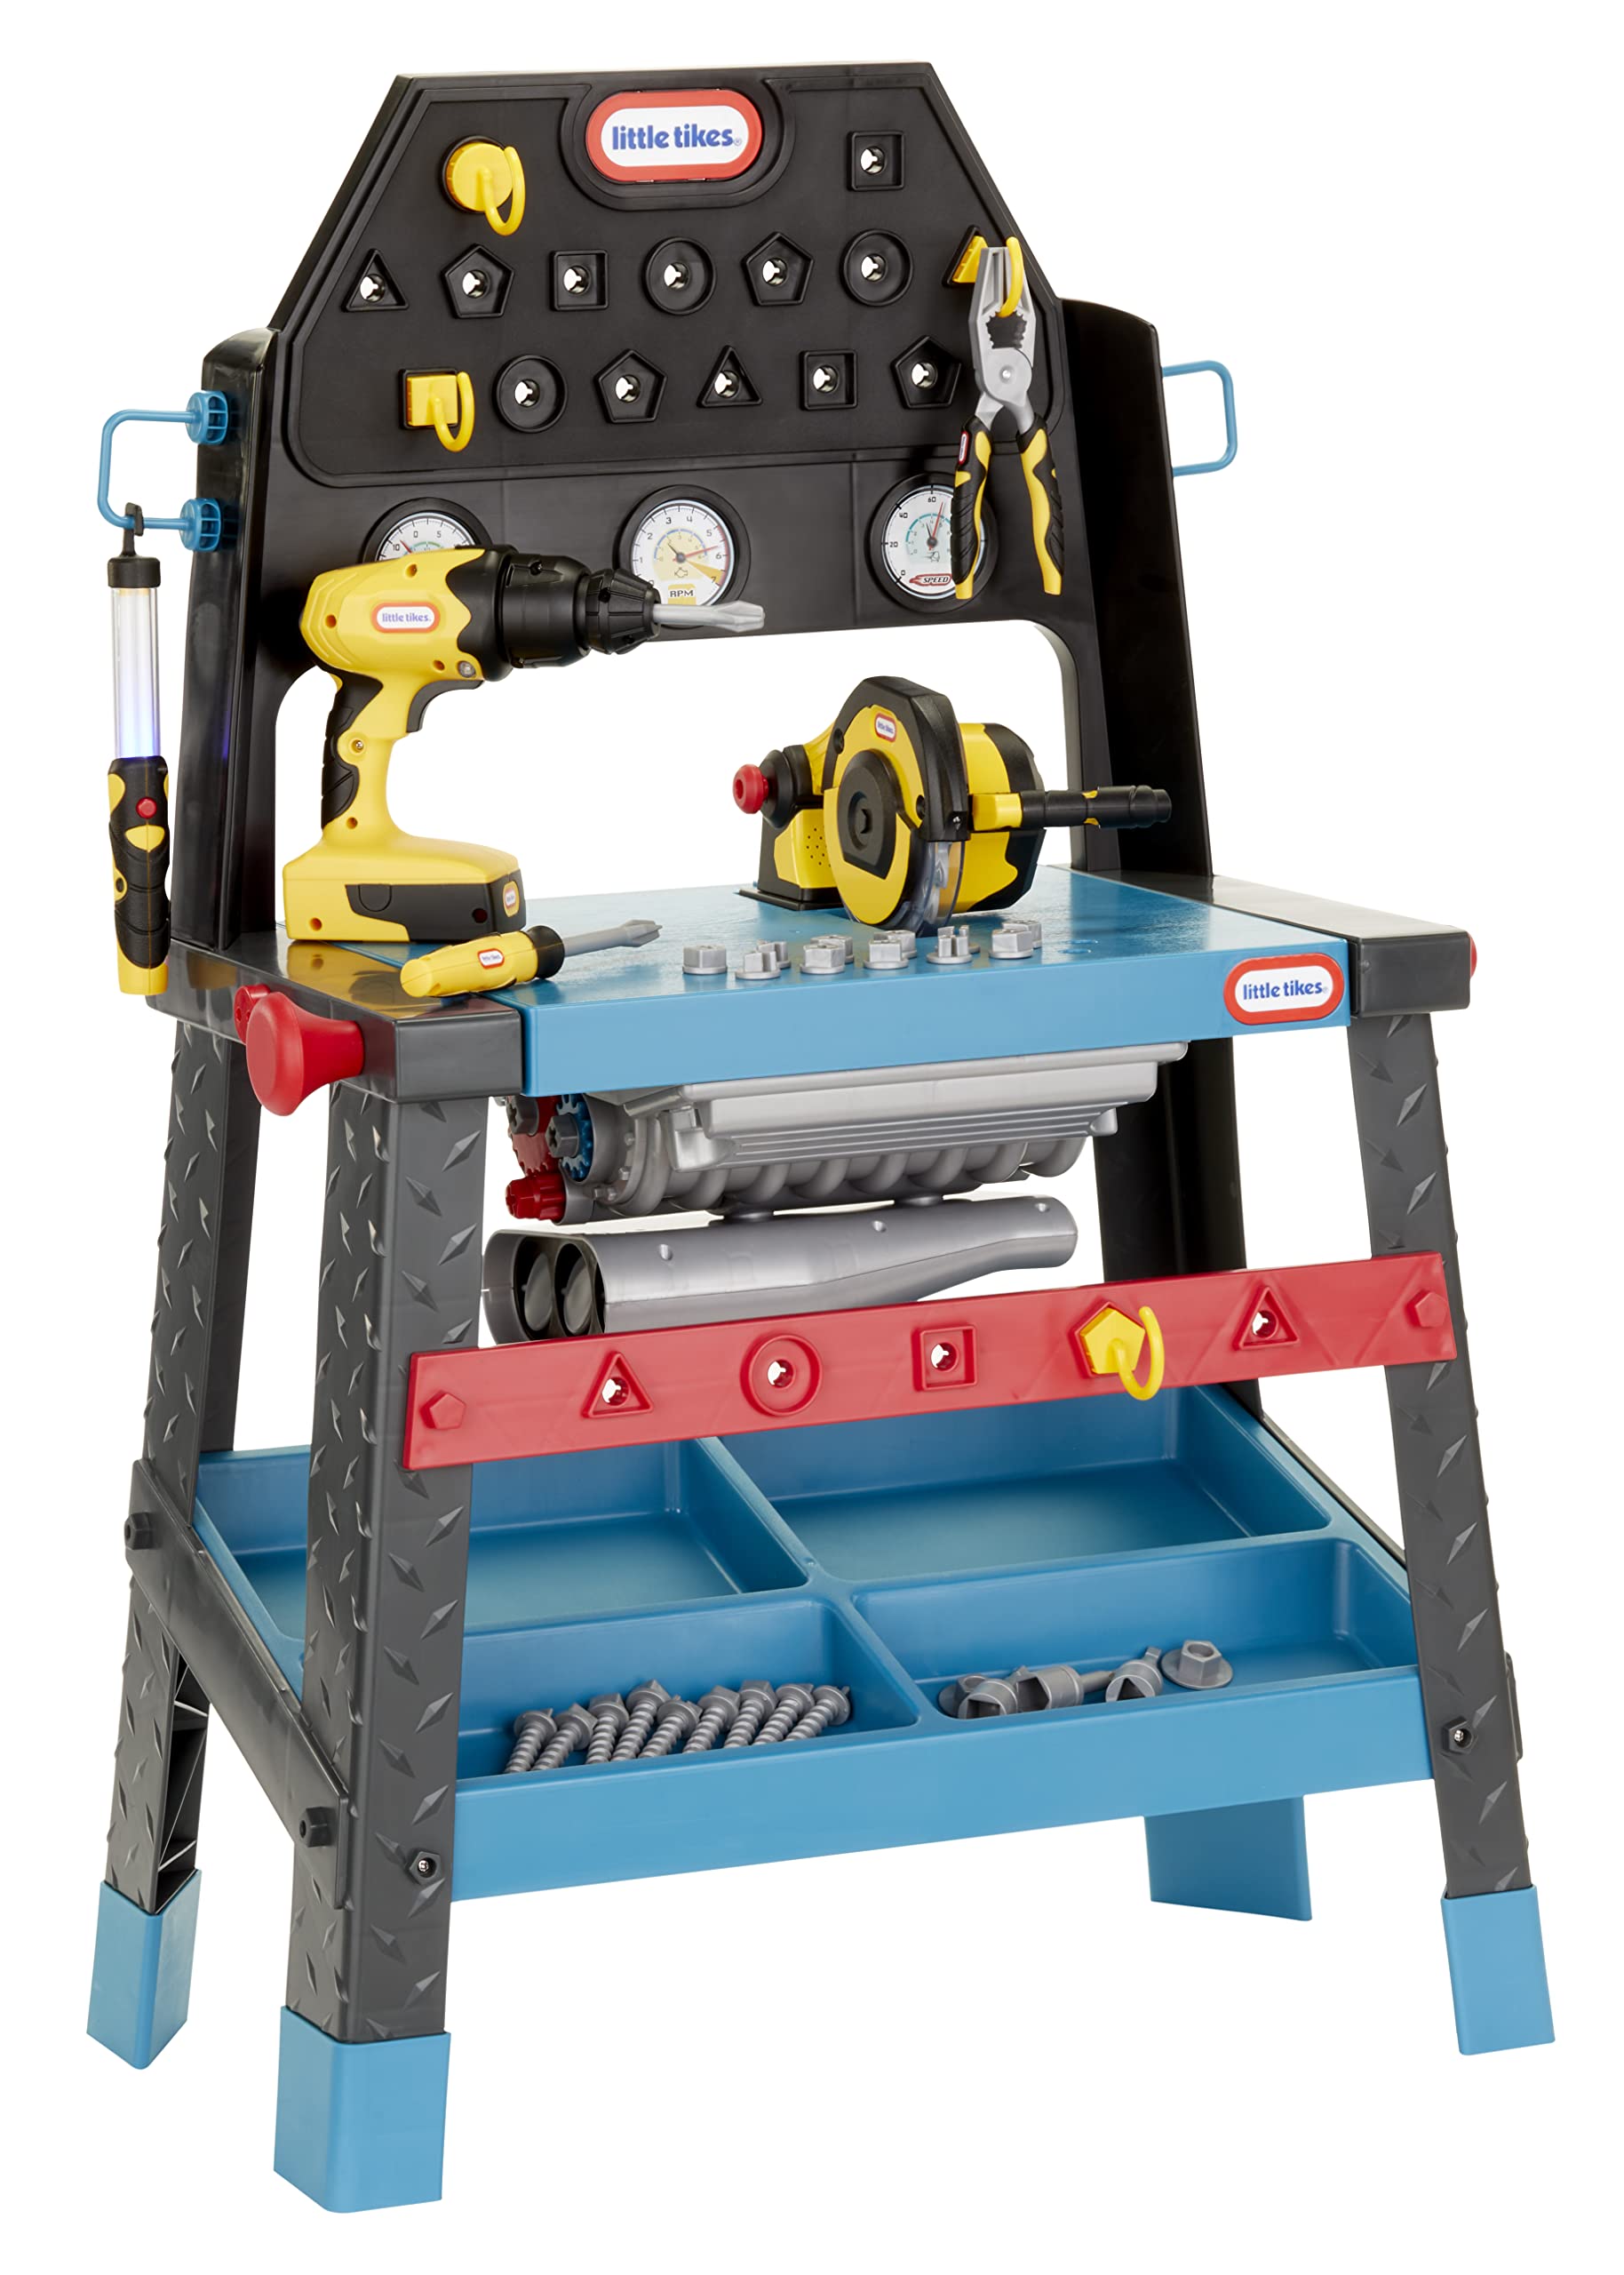 Little Tikes 2-in-1 Buildin' to Learn Motor/Wood Workshop (w/ 50+ Accessories) $52.97 + Free Shipping